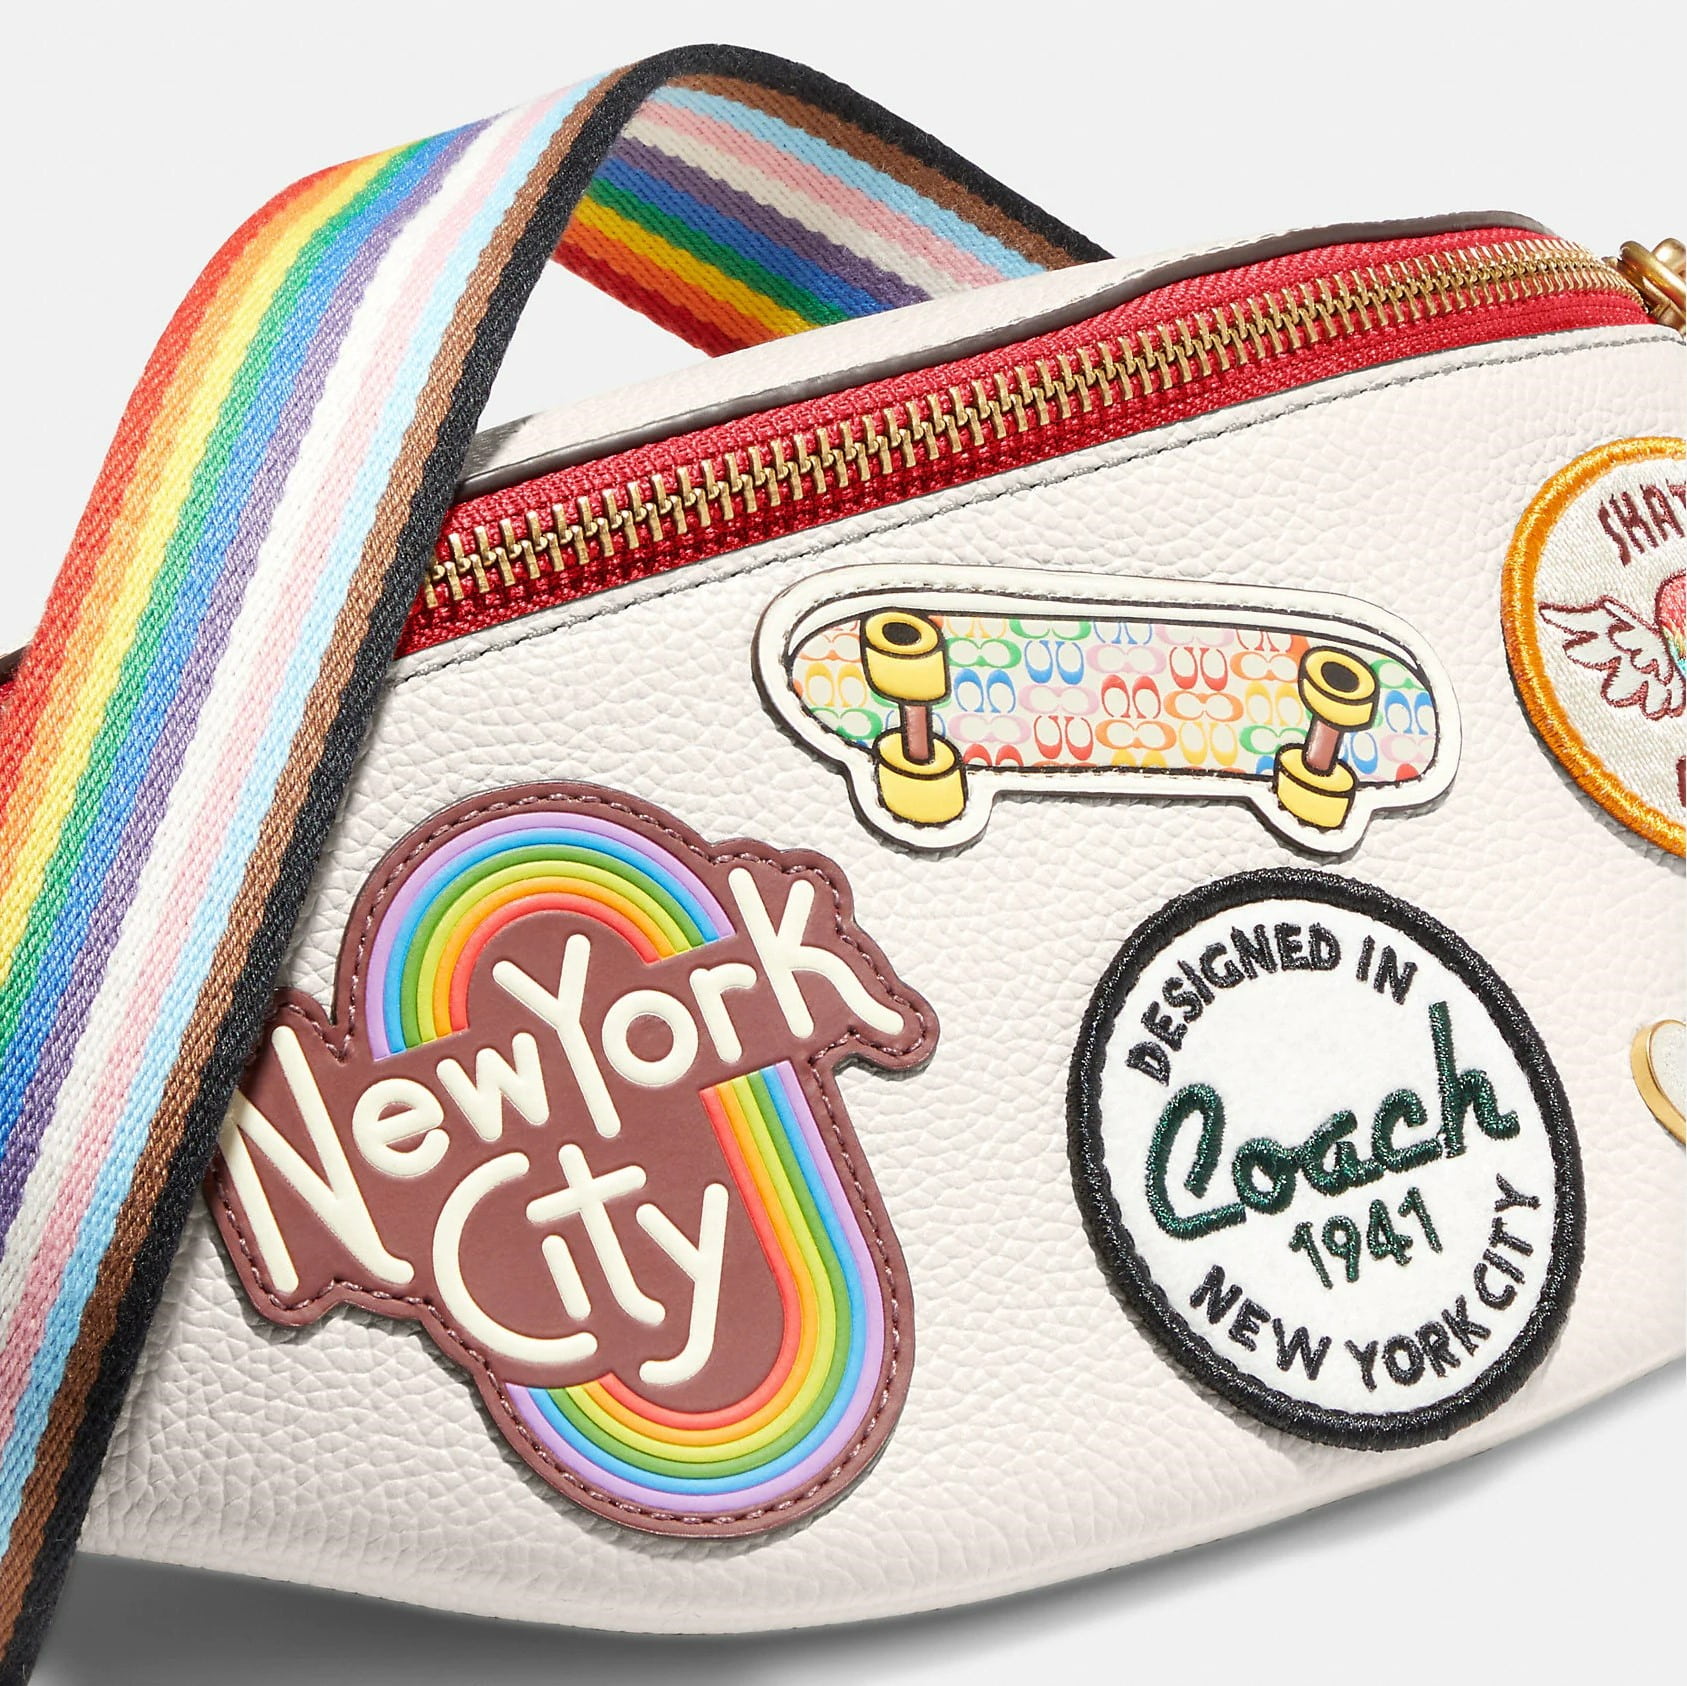 TÚI BAO TỬ COACH NEW YORK CITY CHARTER BELT BAG 7 WITH PATCHES 12